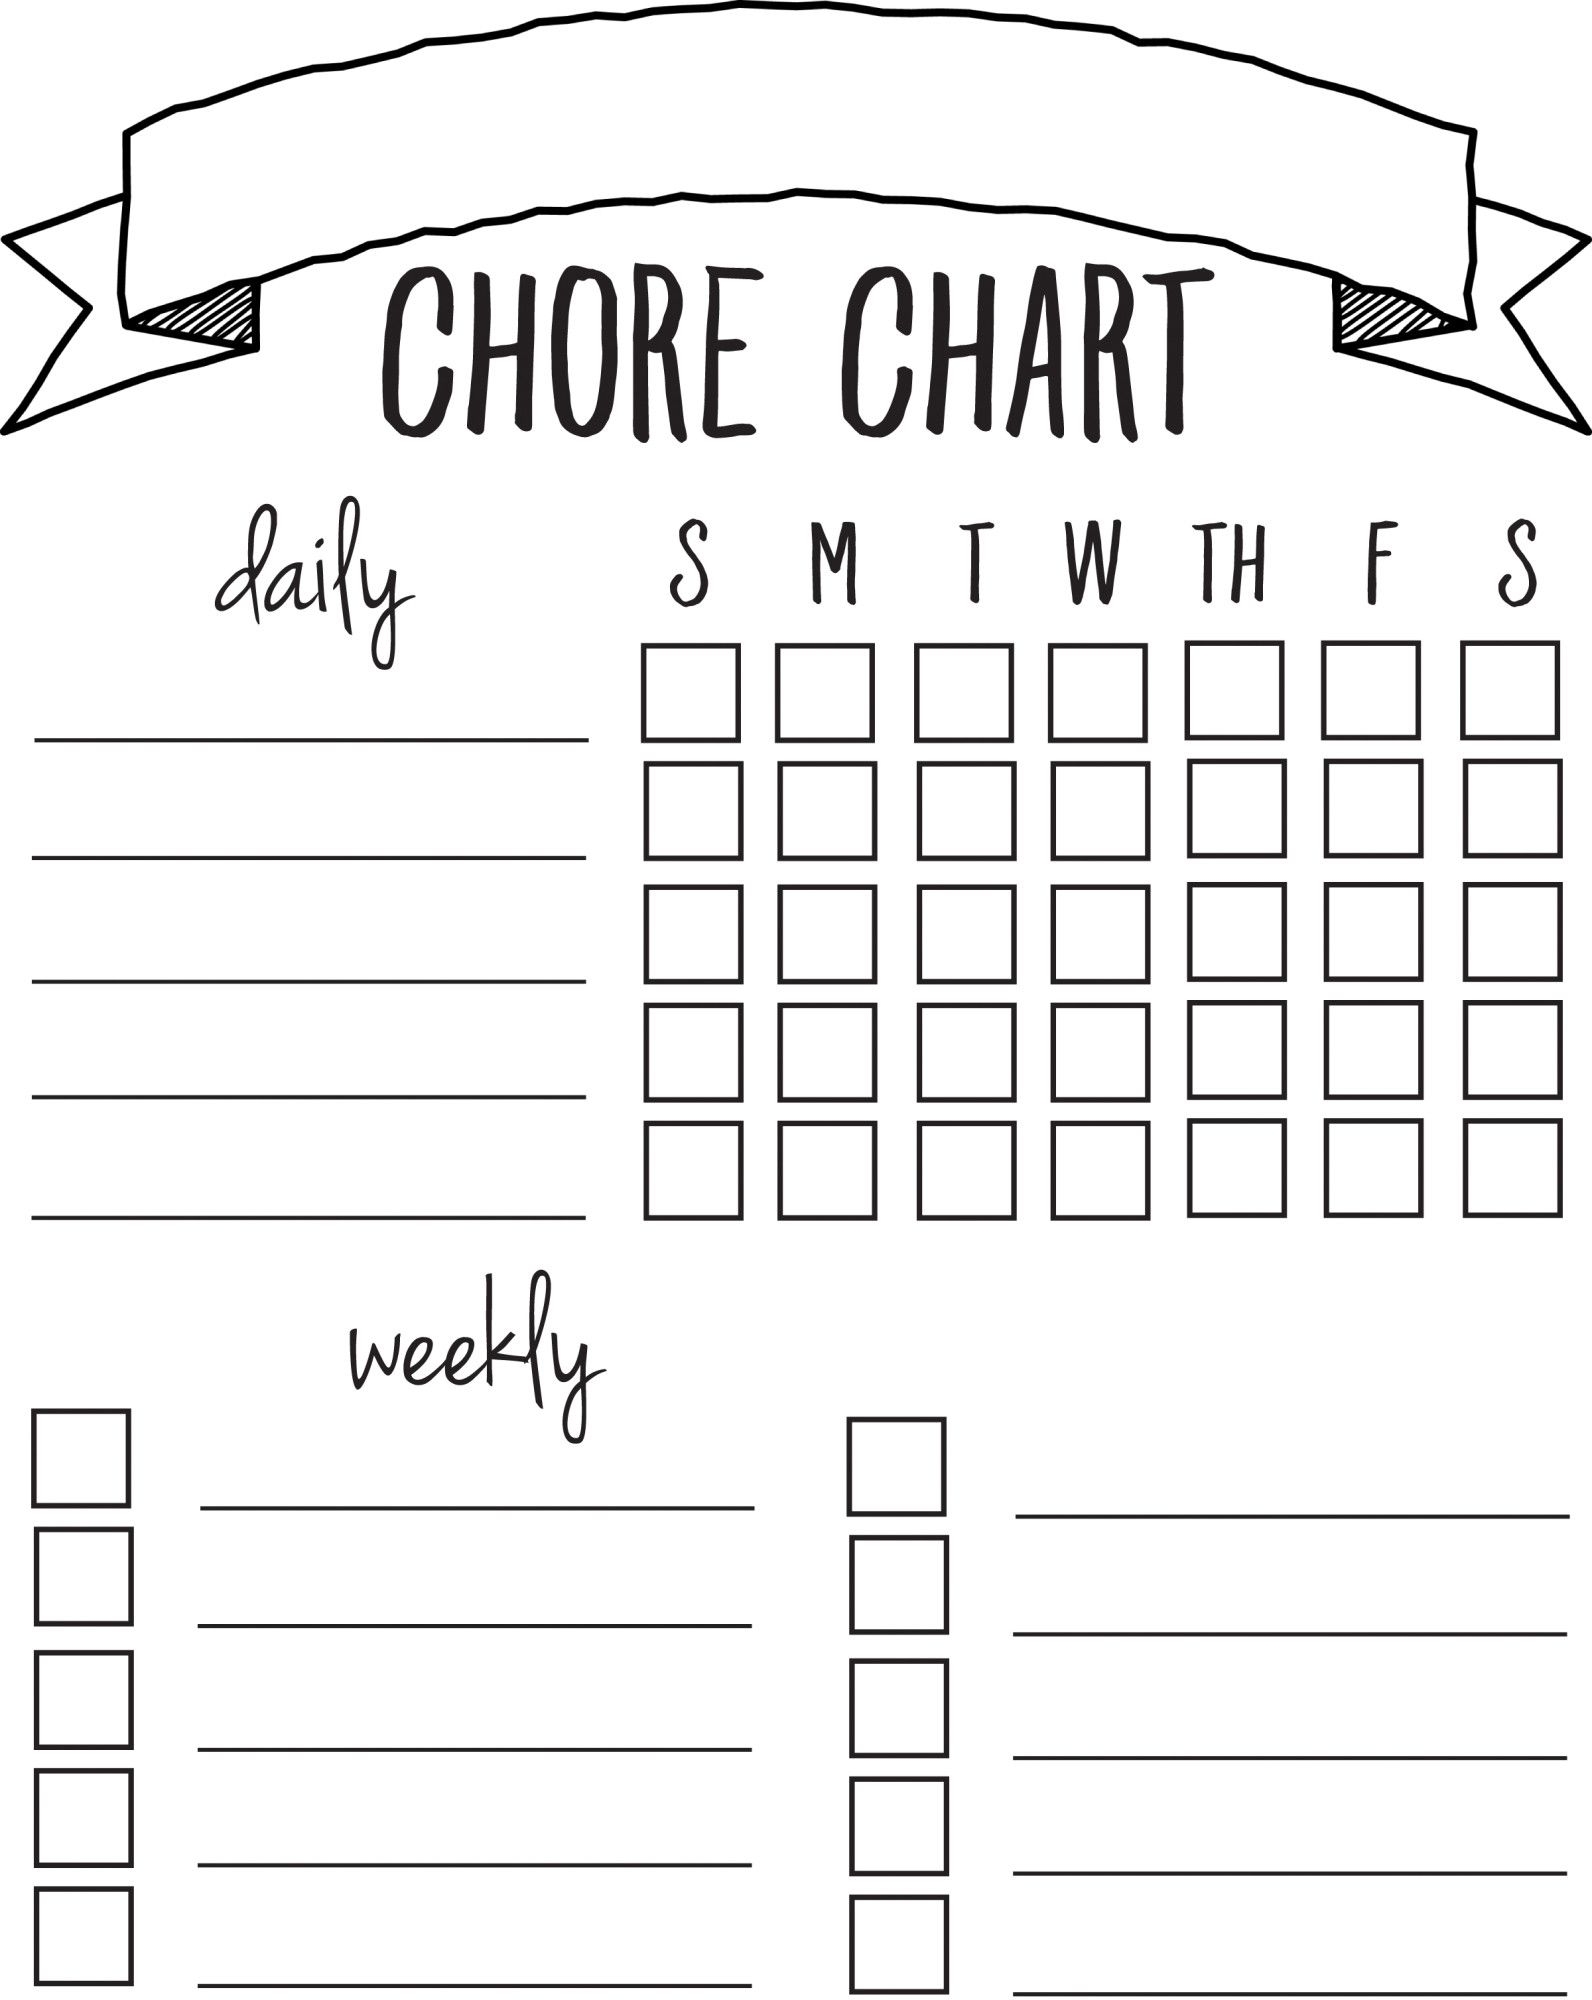 Printable Chore Chart Sincerely Sara D Home Decor DIY Projects Chore Chart Kids Chore Chart Template Printable Chore Chart - Free Printable Chore Chart Templates